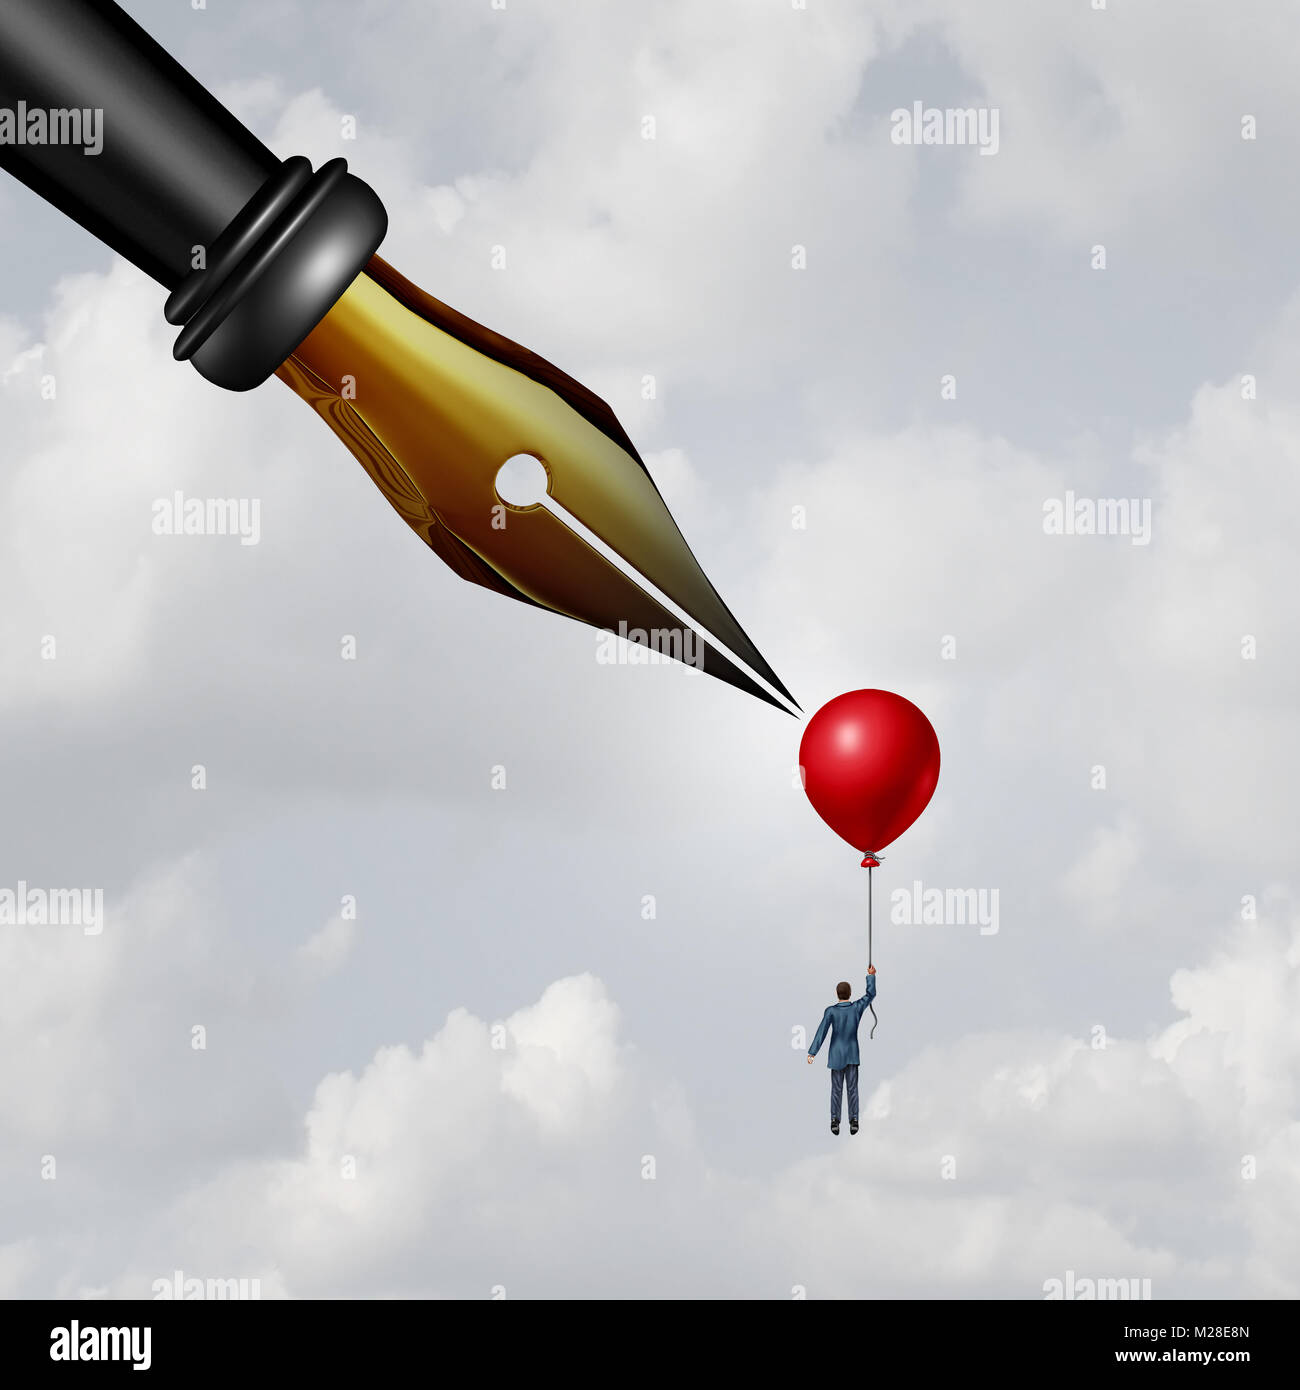 Contract danger and unfair terms and conditions or anonymous source reporting as a businessman holding a balloon with a sharp pen nib piercing. Stock Photo